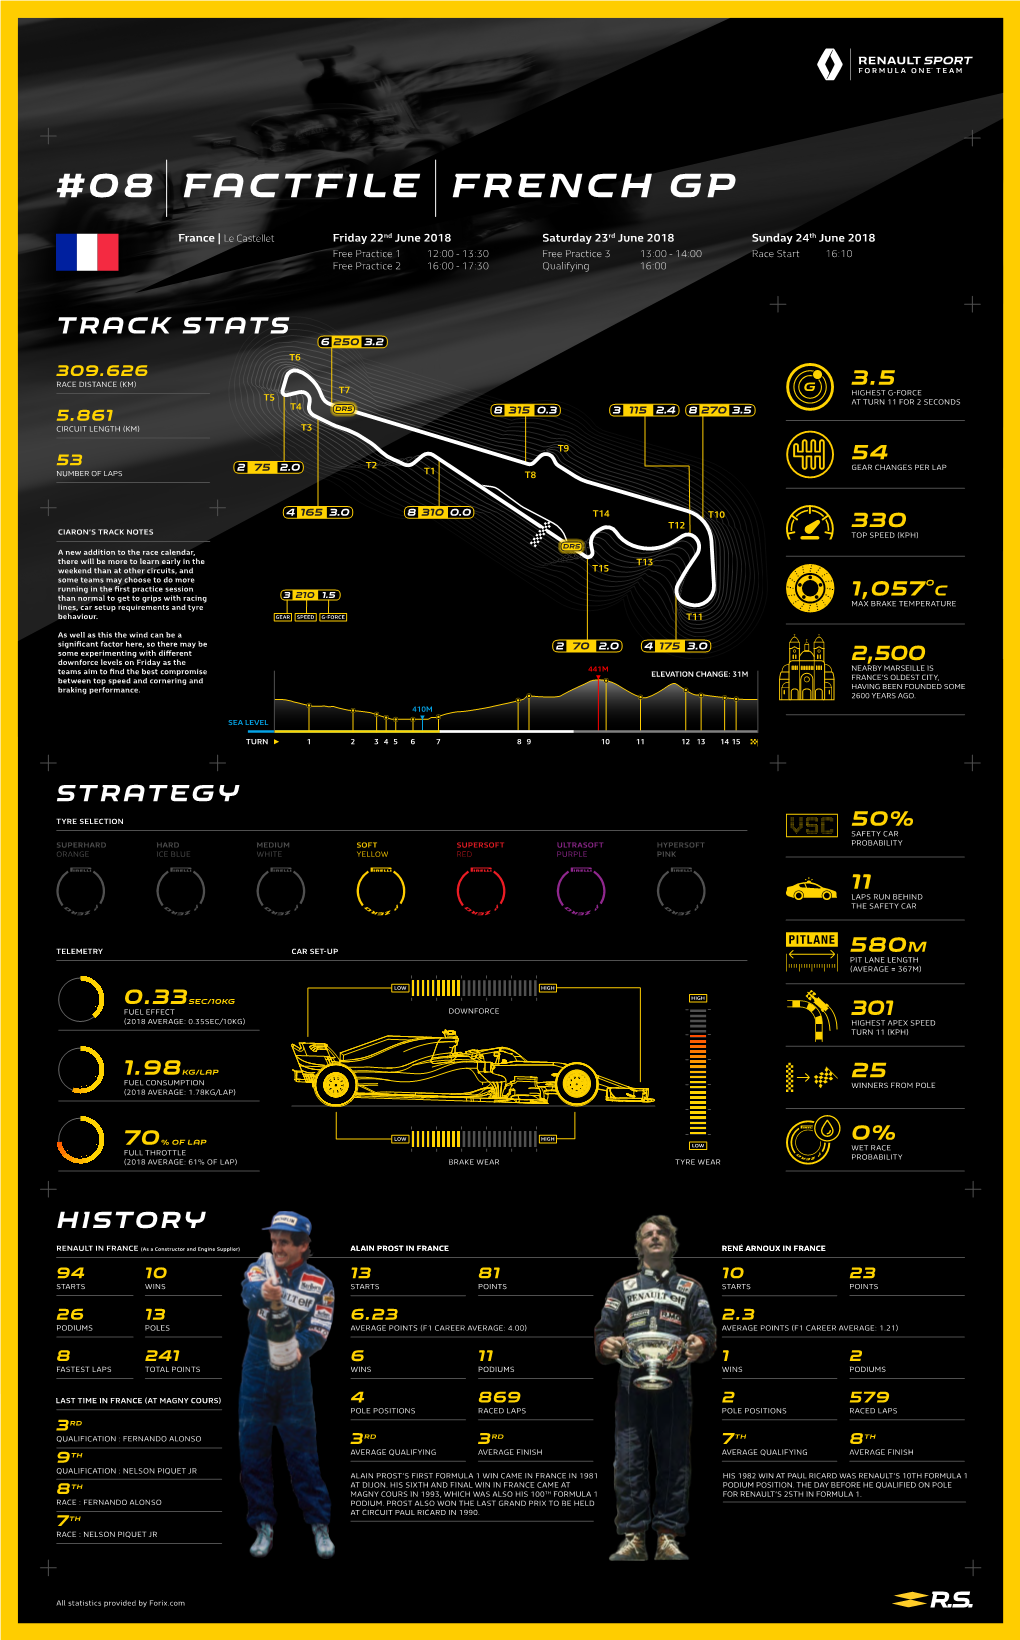 08 Factfile French GP